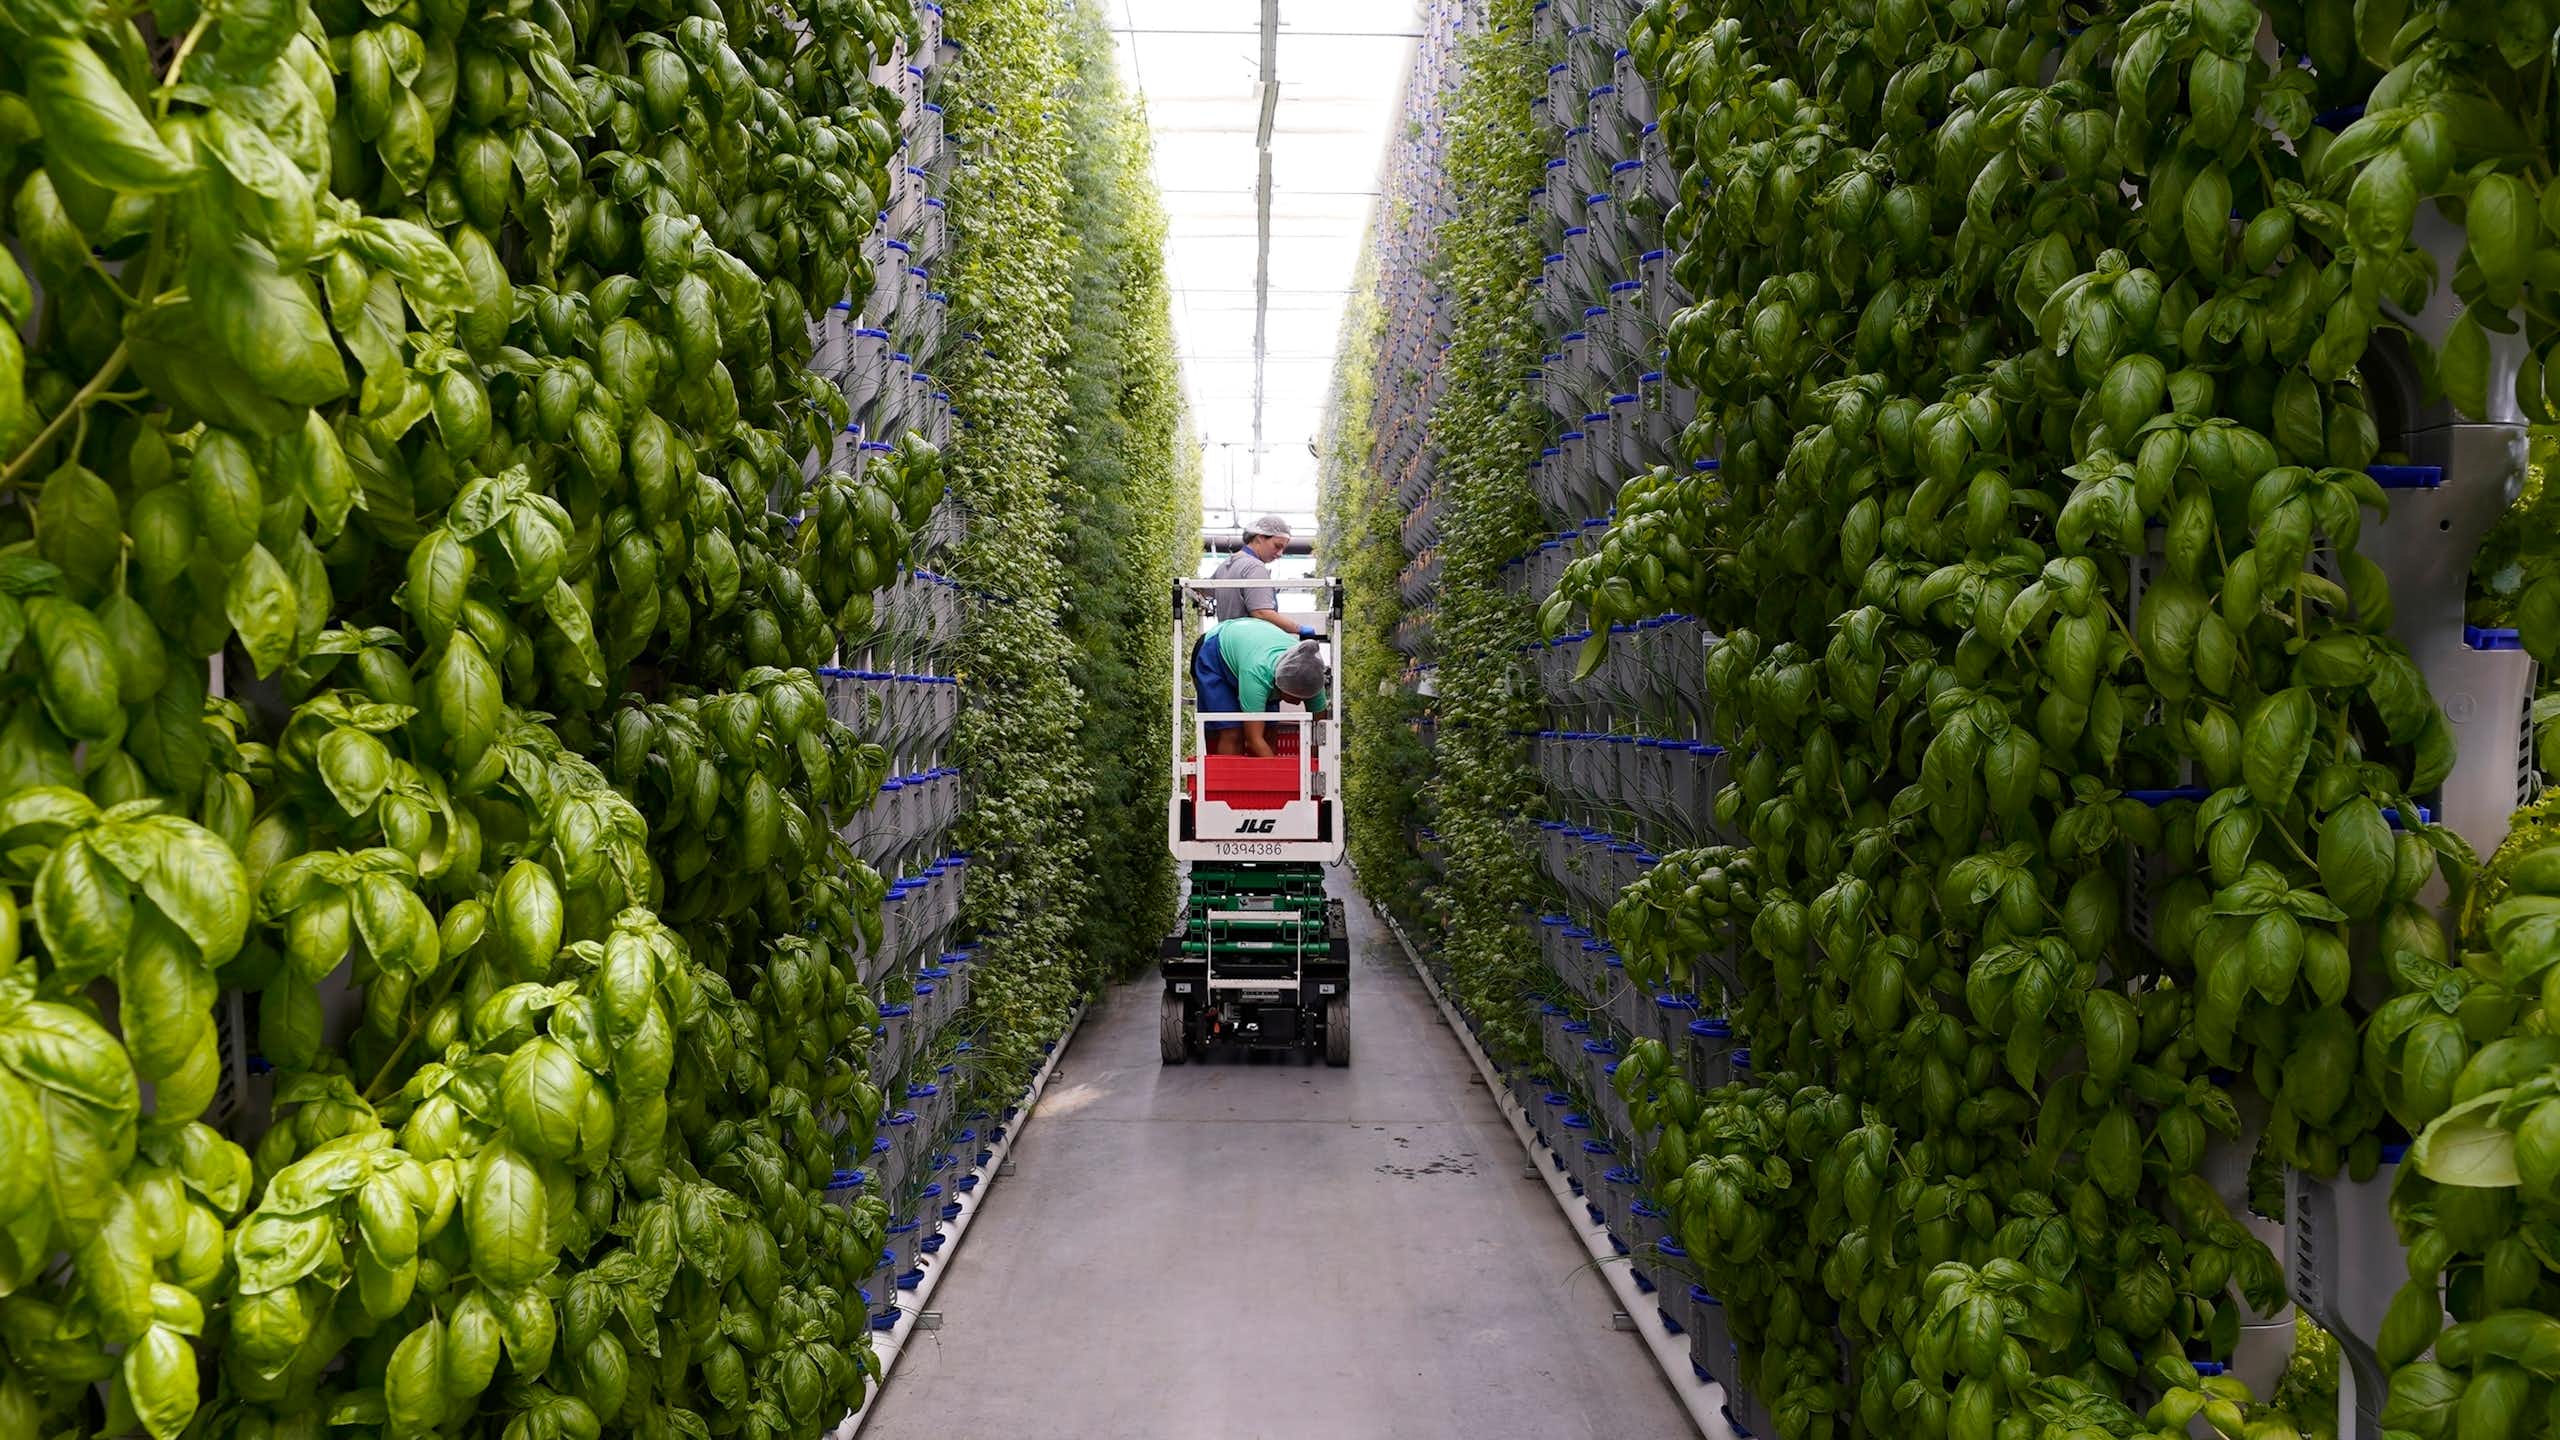 Workers use a lift to examine herbs in an indoor facility.